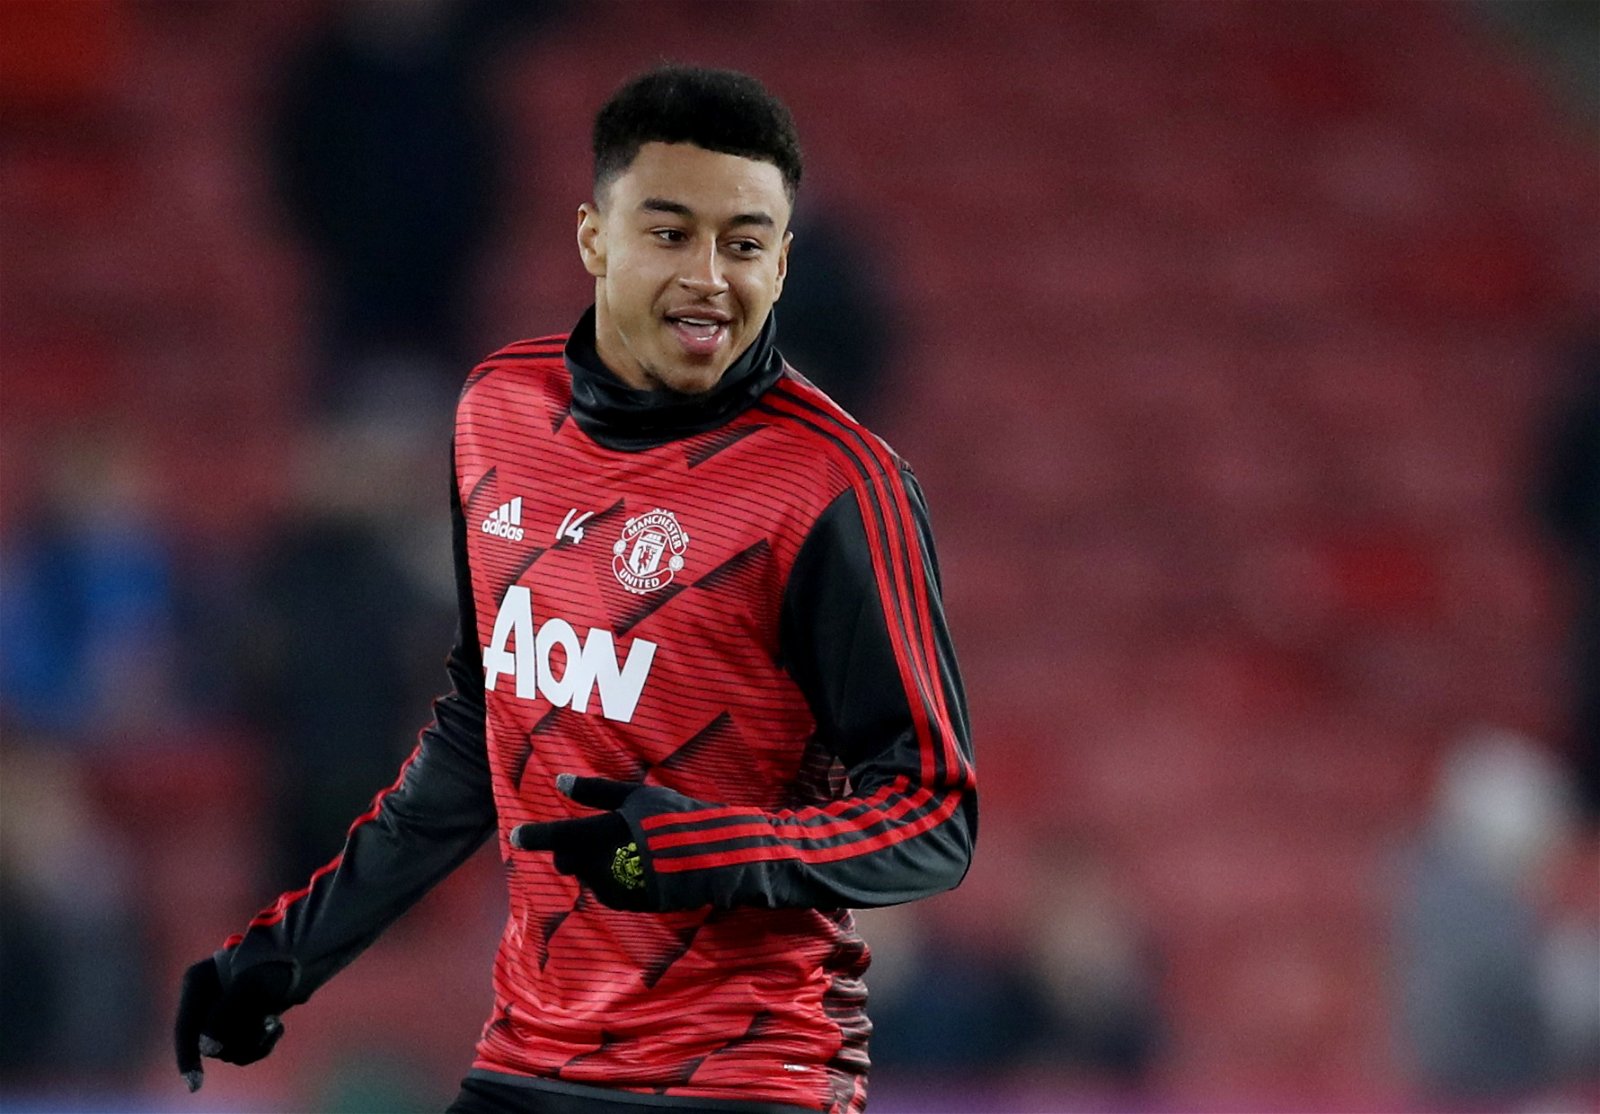 Manchester United star Jesse Lingard reveals he rejected offers to join rivals